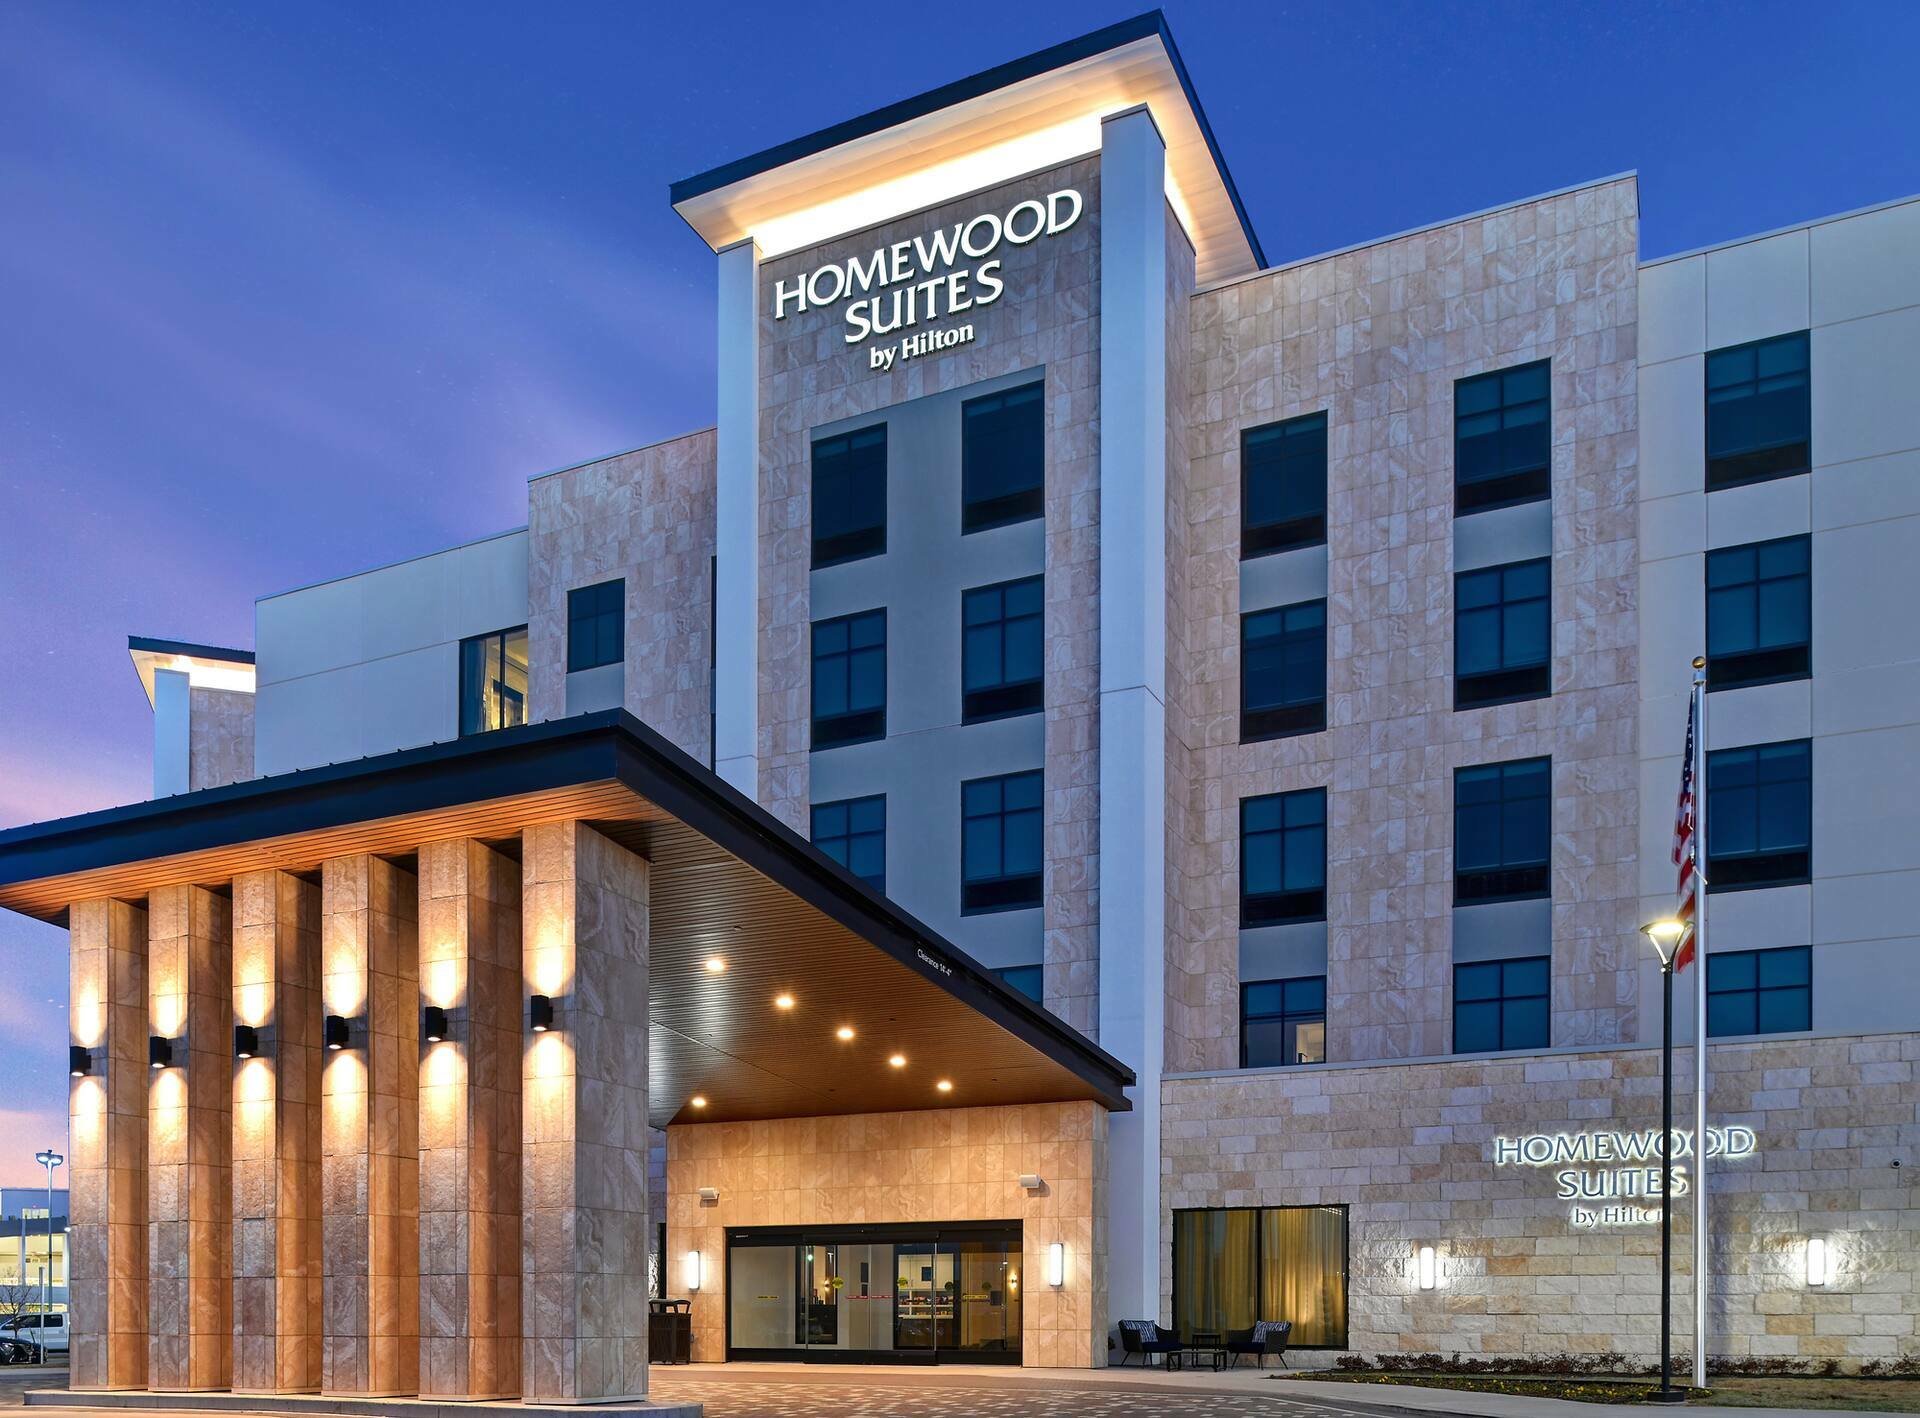 Photo of Homewood Suites by Hilton Dallas The Colony, The Colony, TX